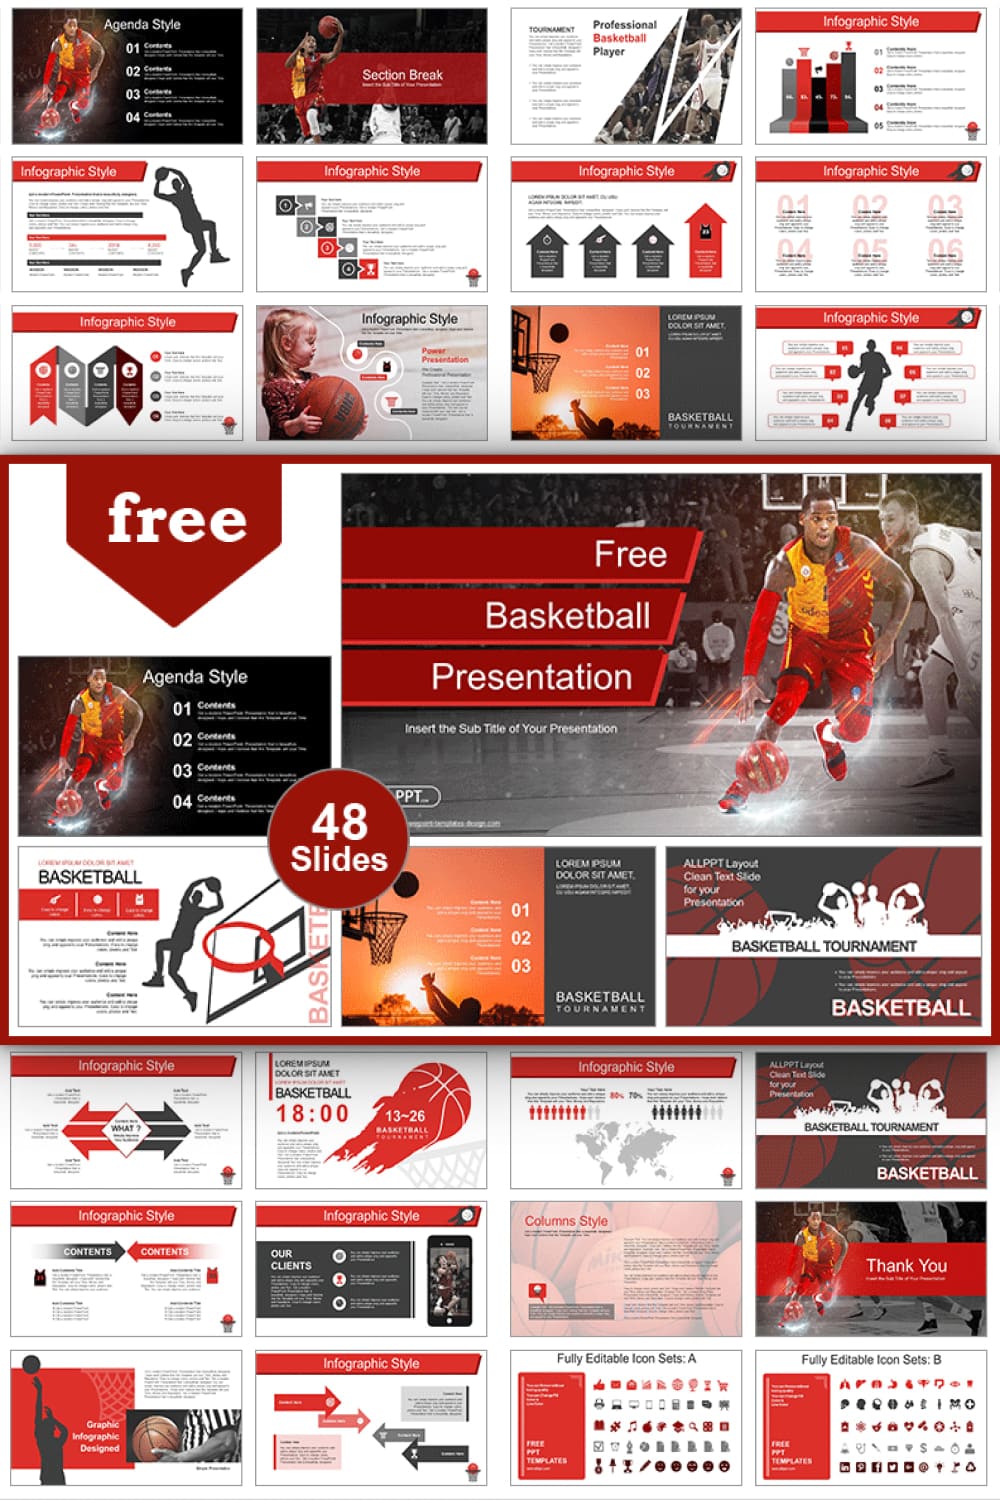 This template contains various basketball backgrounds and shapes.